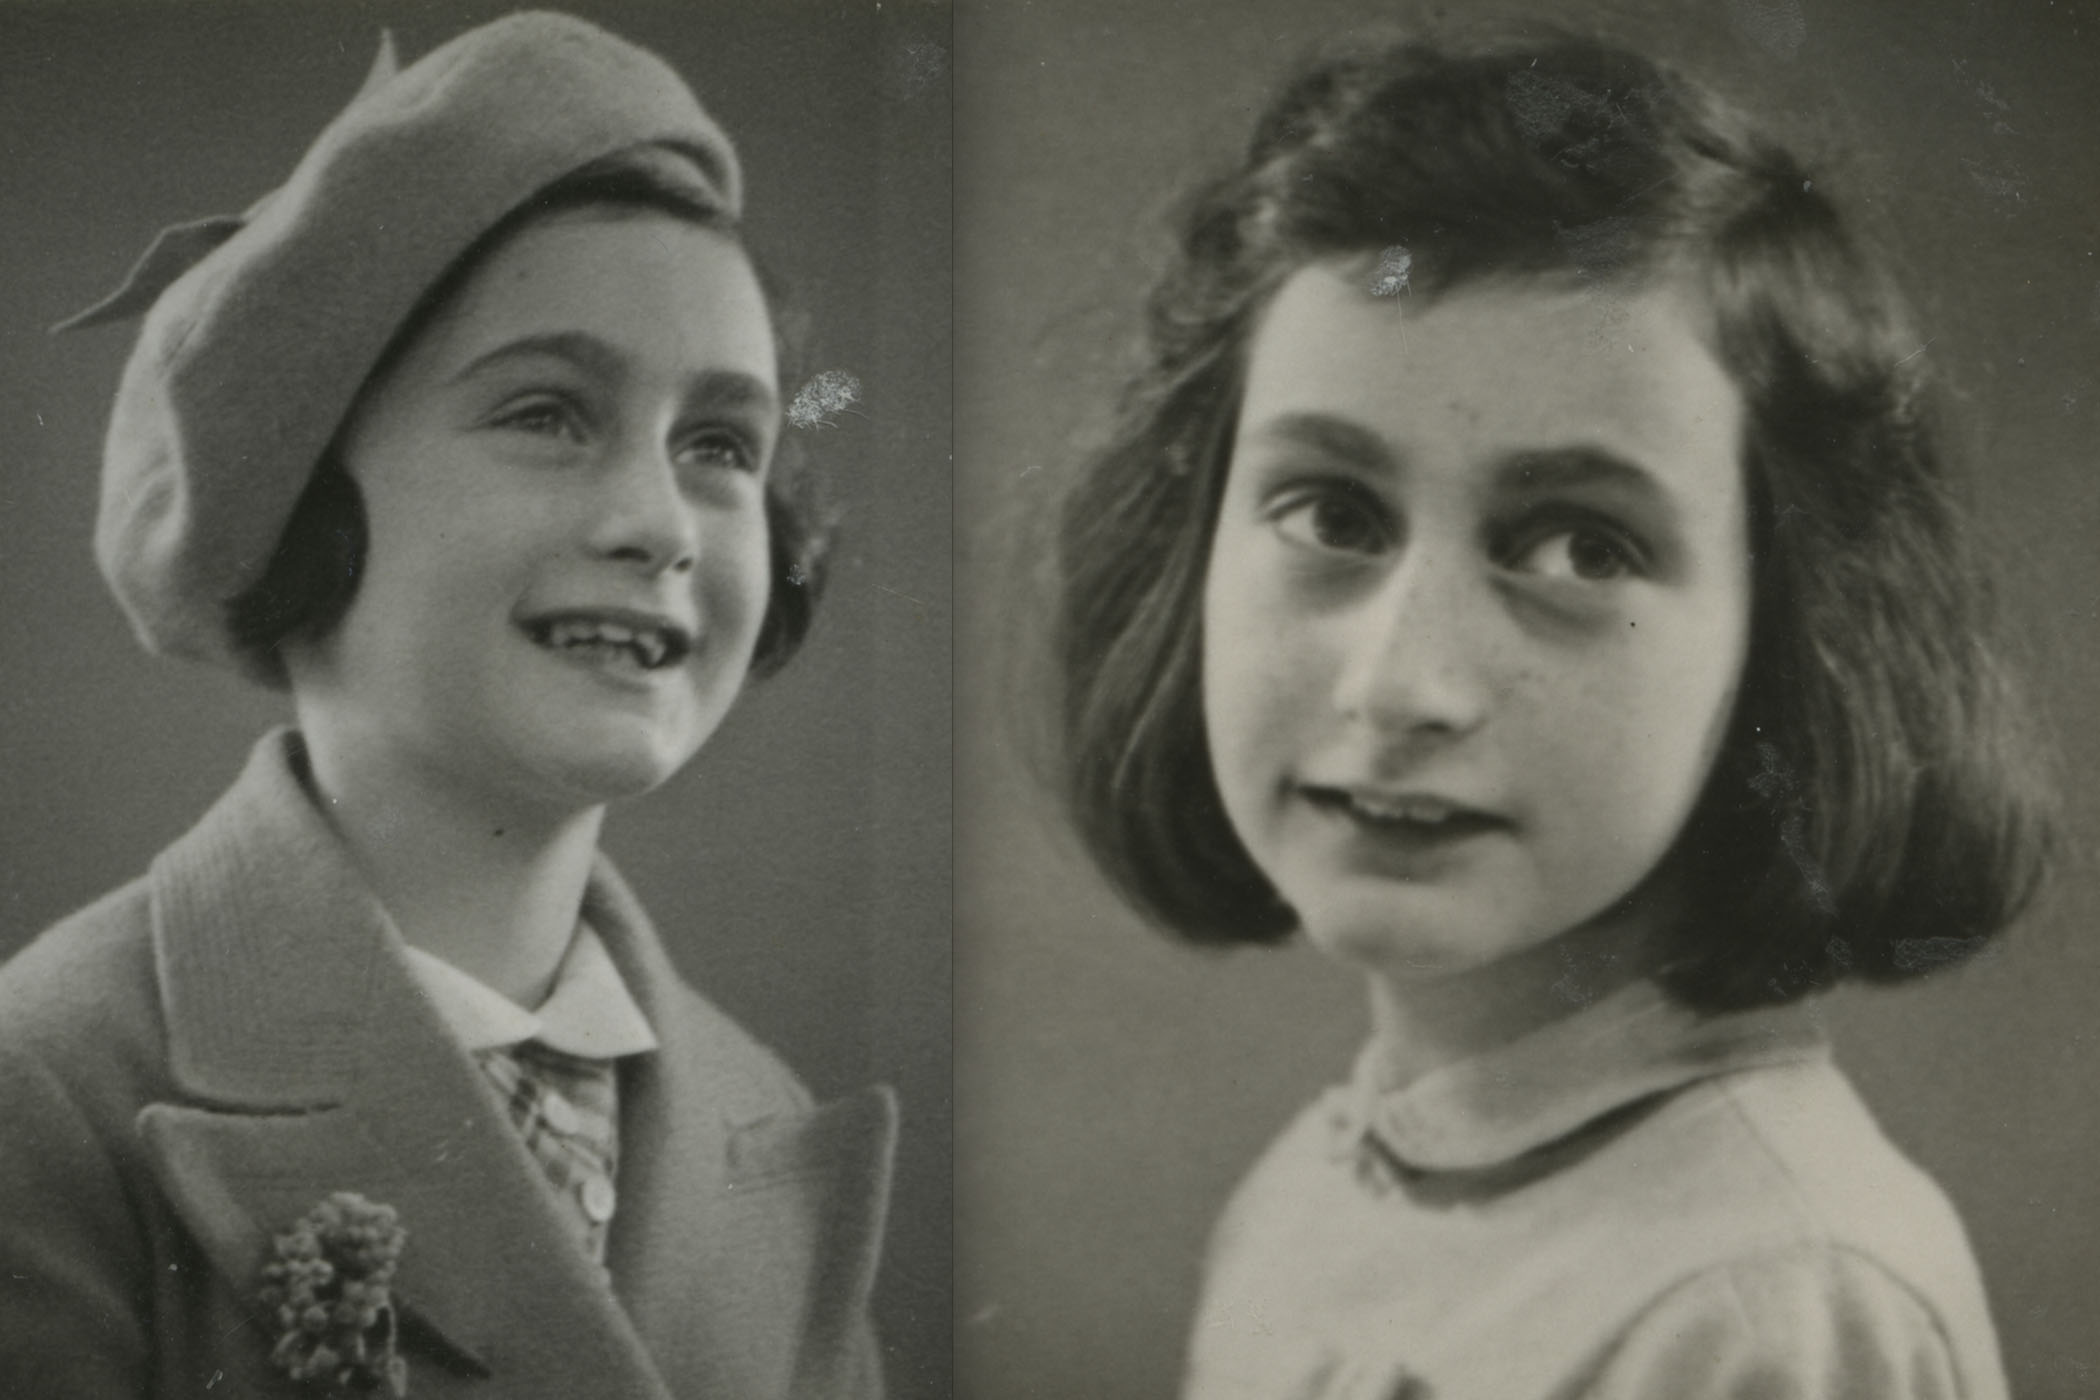 Anne Frank in 1937 and 1940.